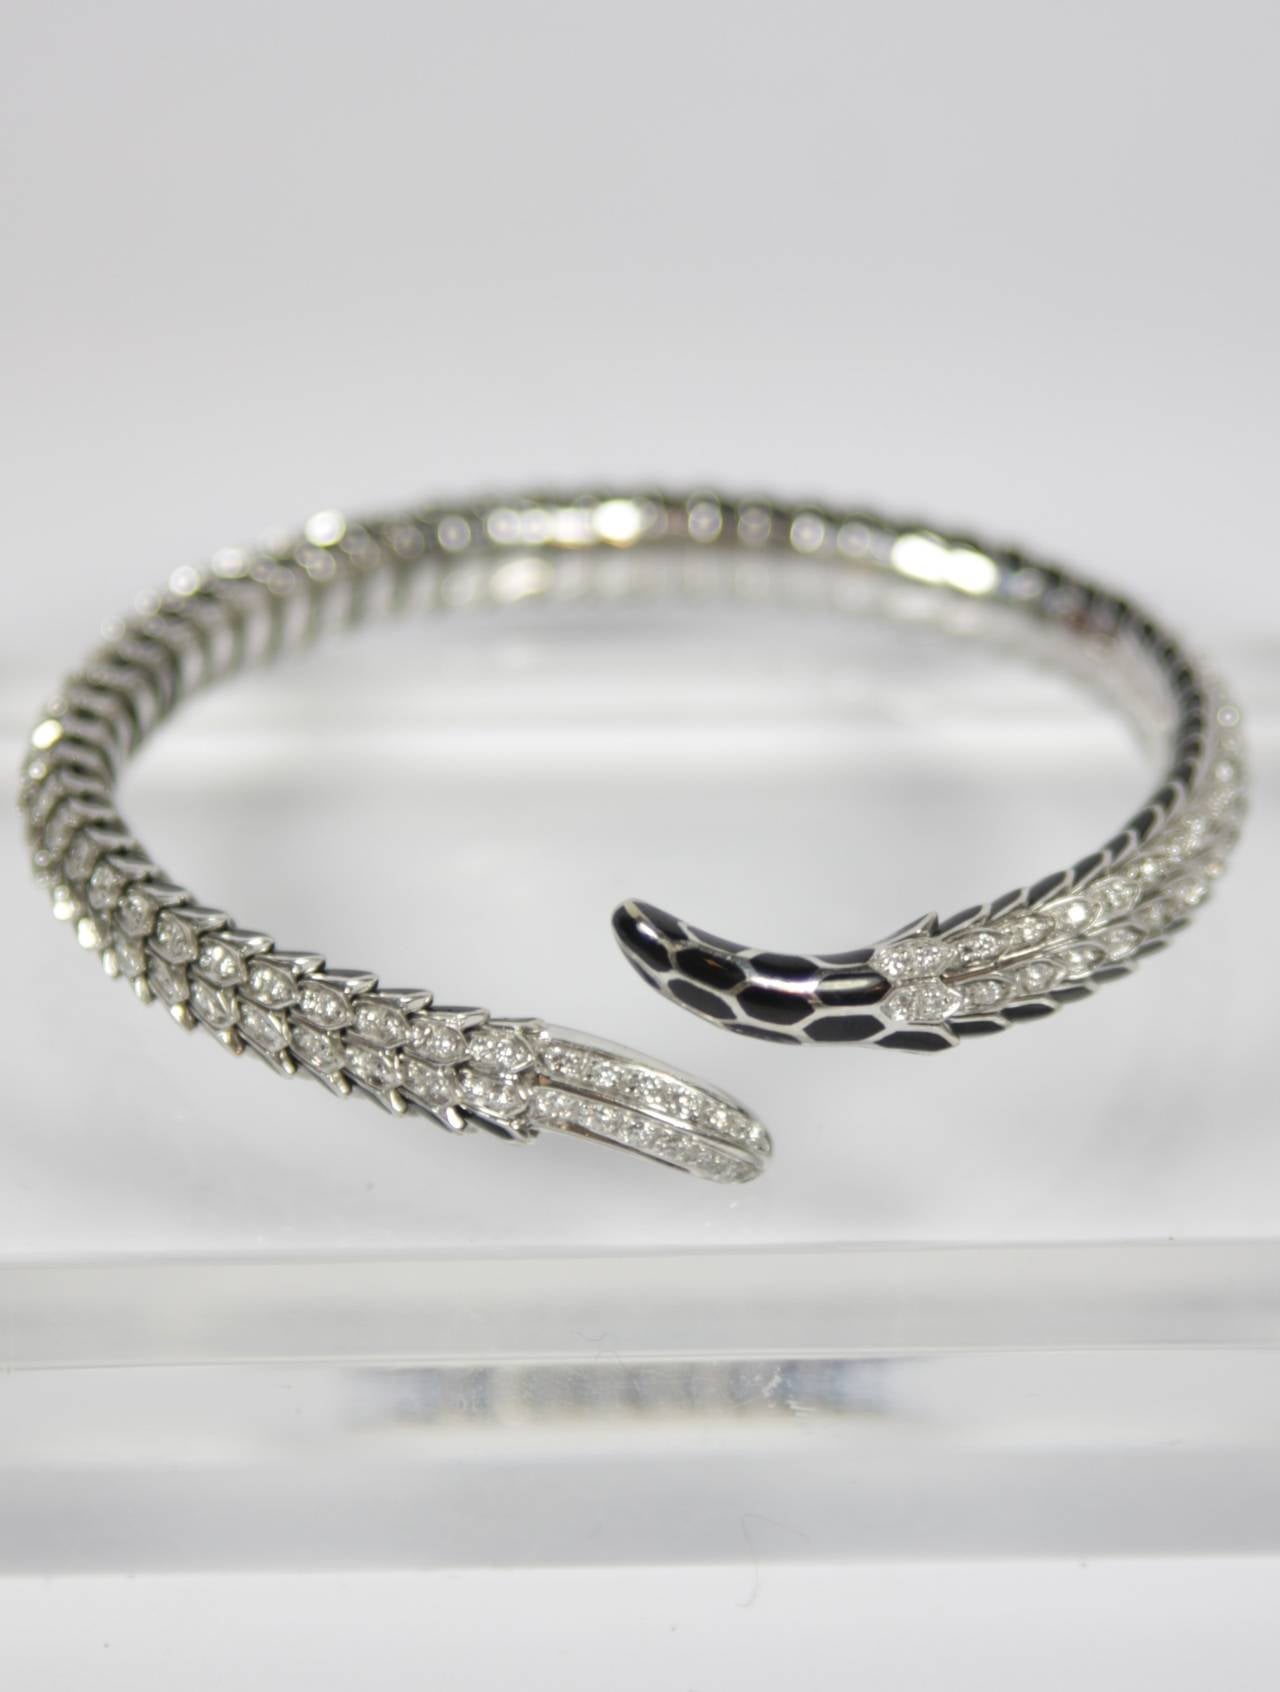 This Roberto Coin bracelet is composed of 18kt white gold and features pave diamonds. In excellent condition. A stunning piece with a small ruby interior accent.

Specs: 
18 KT White Gold 39.6 Approximate Grams
Diamonds: Approximately 228